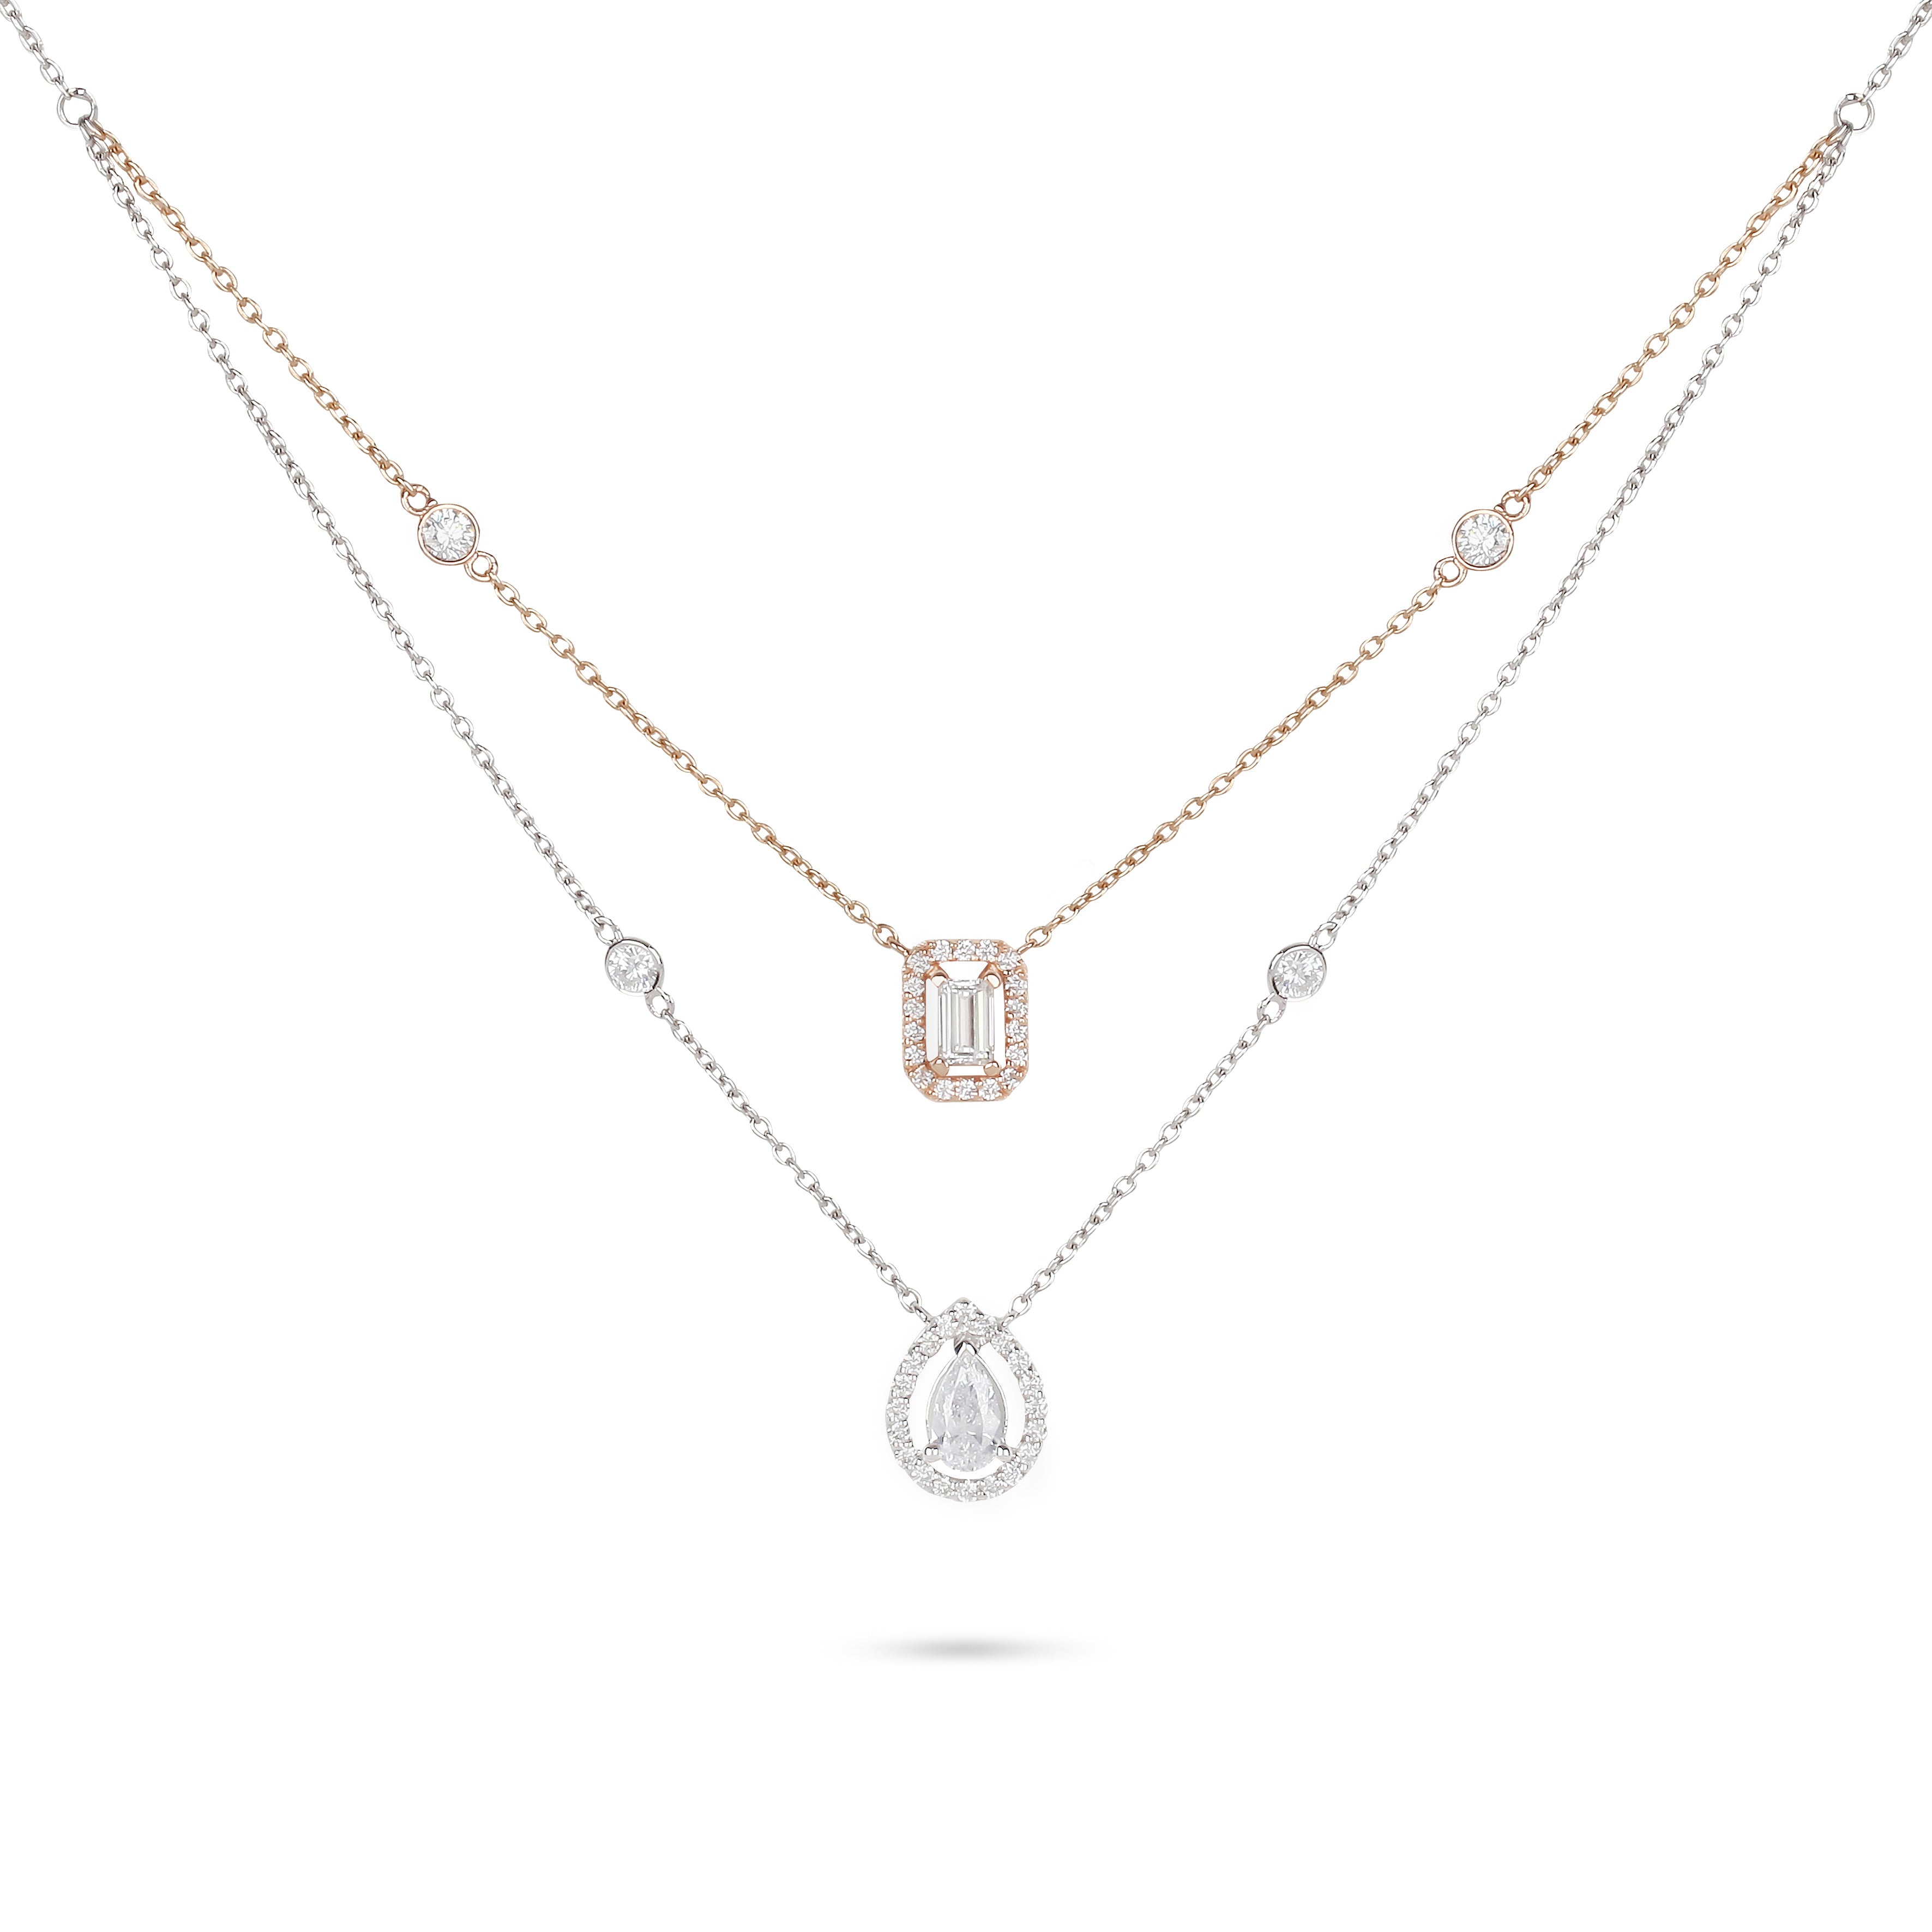 Two-Tone Layer Mixed Cut Diamond Necklace | Diamond Necklace | Buy Diamond Necklace Online